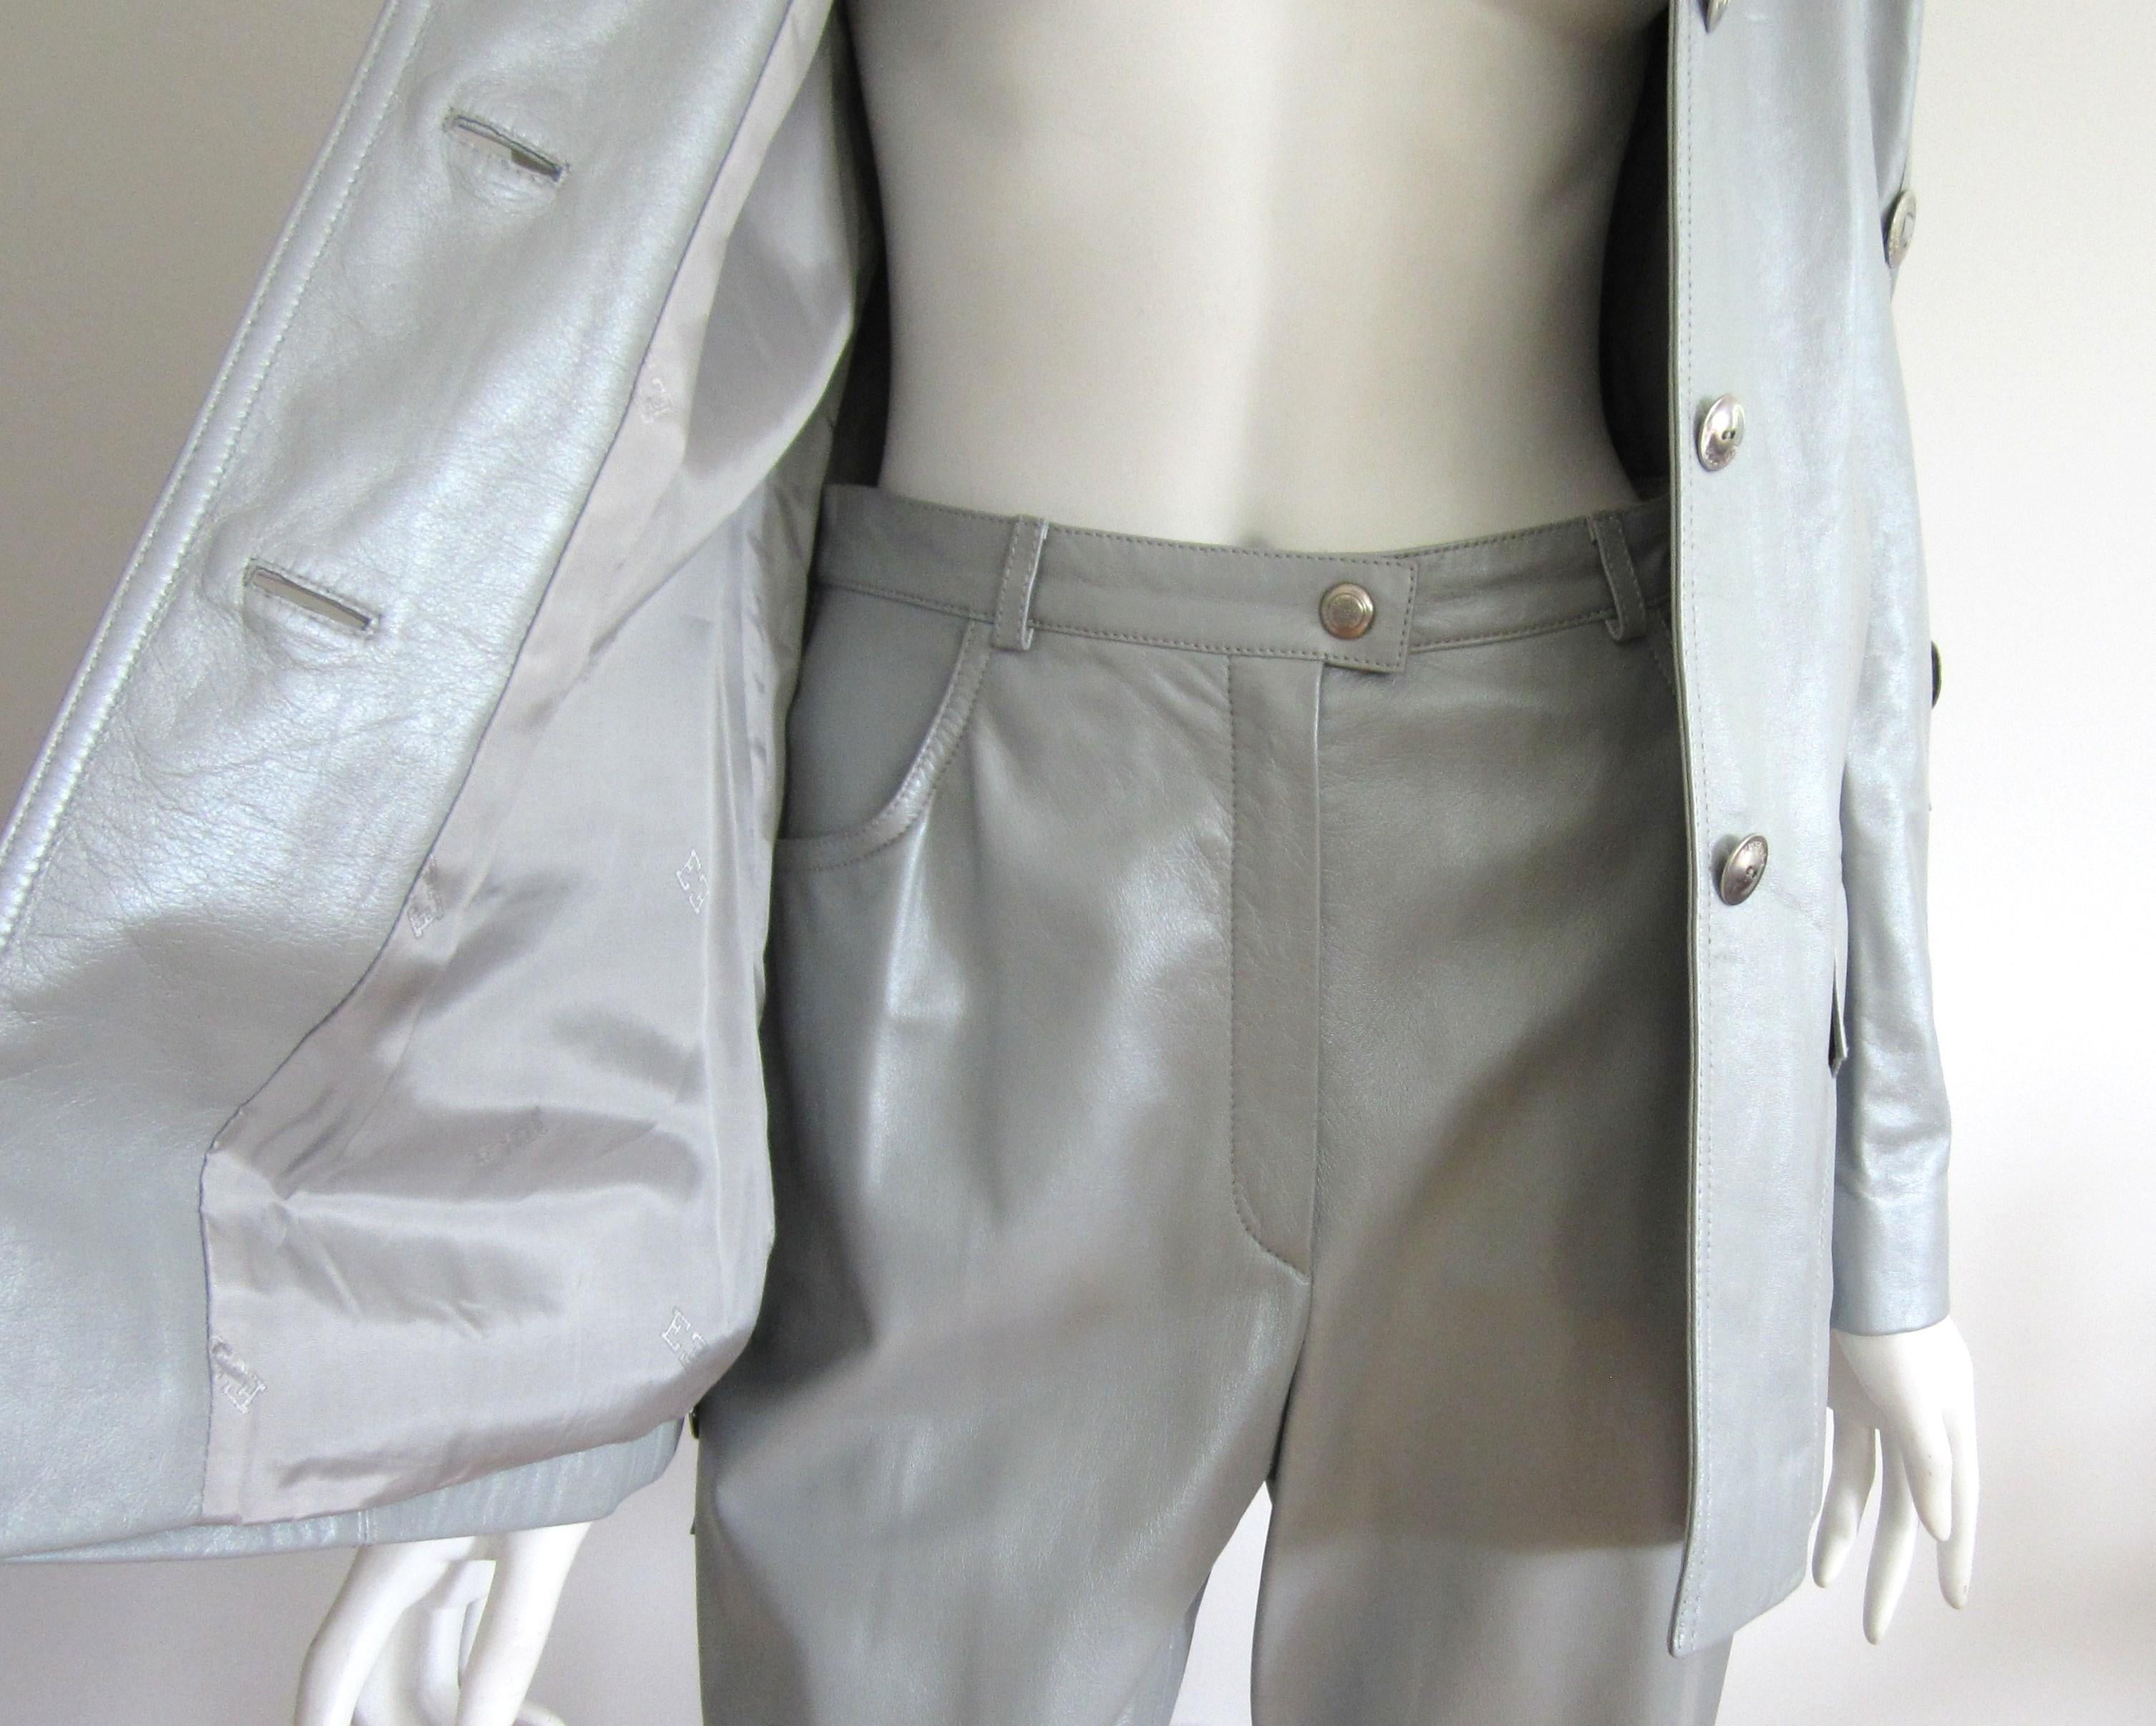  Escada Leather Jacket Pants - Western Motif Grey Suit New With Tags 1990s  For Sale 1